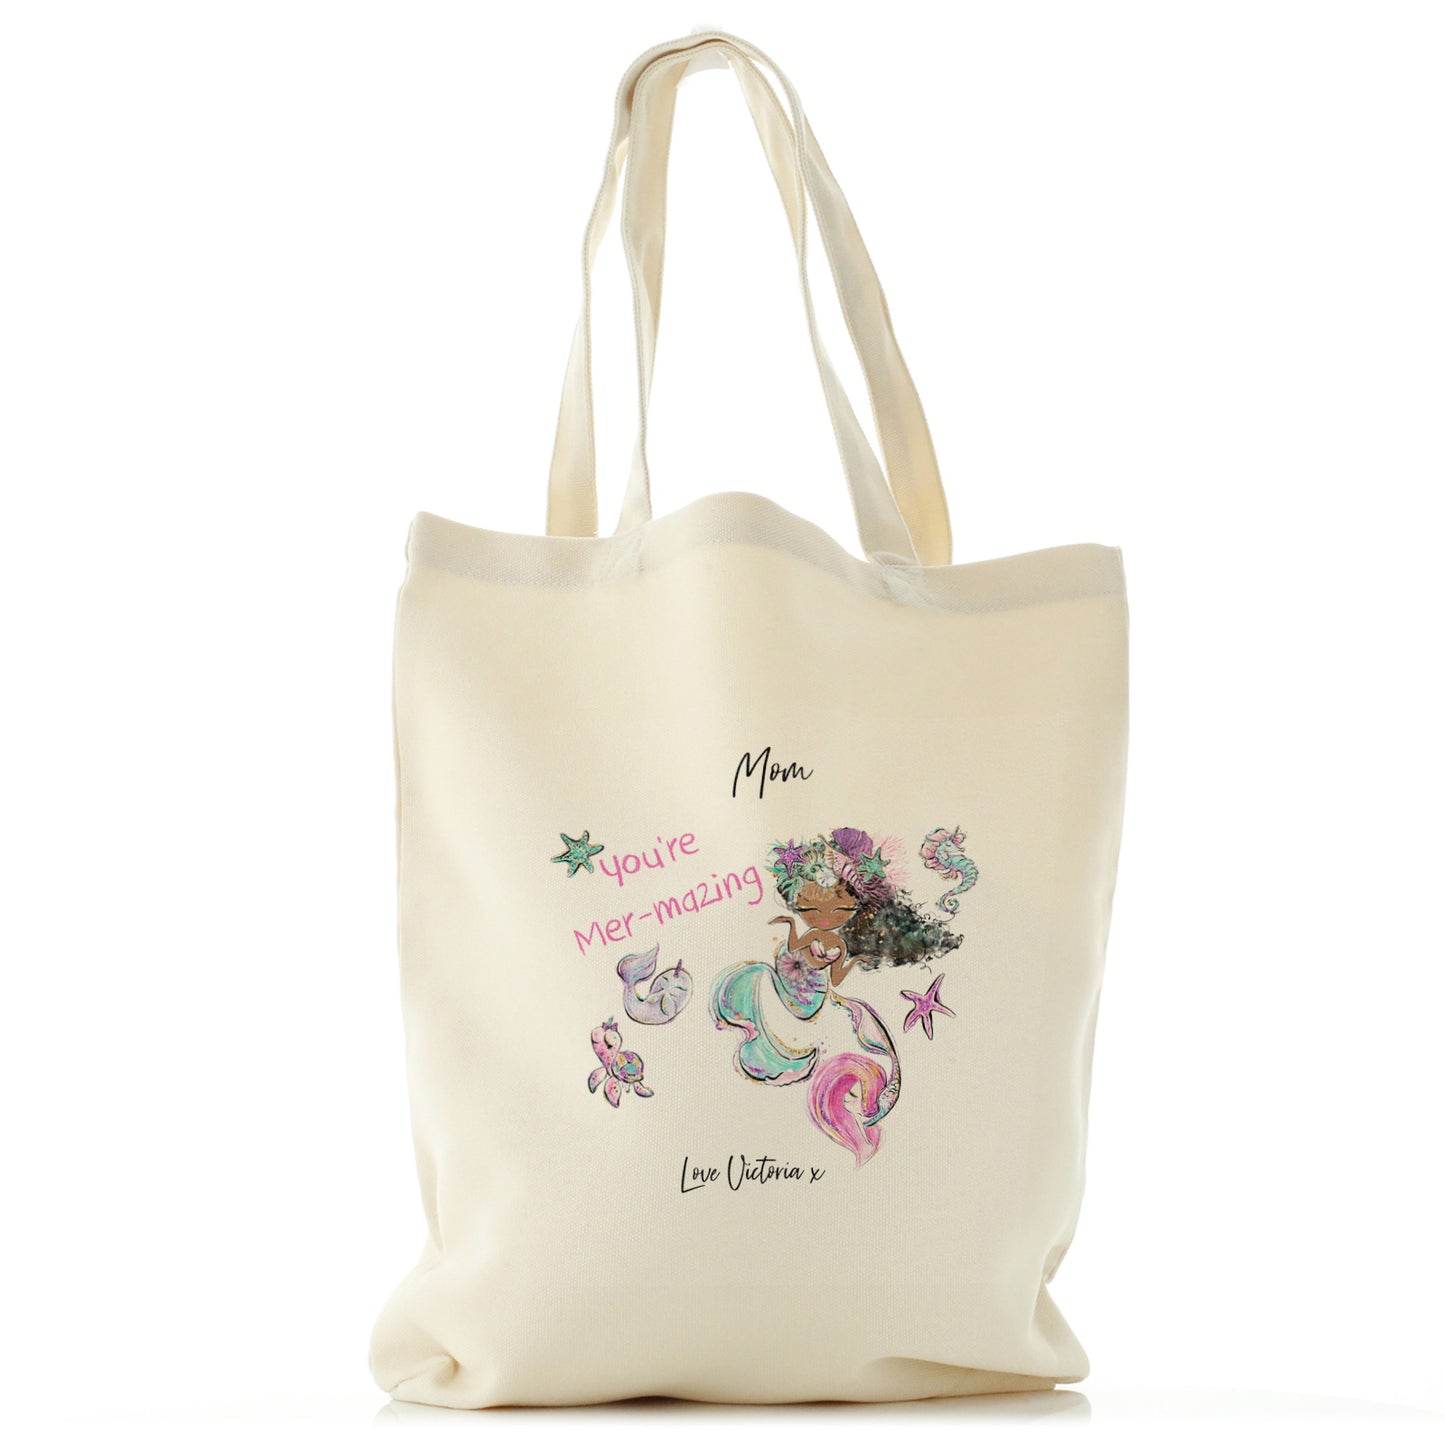 Personalised Canvas Tote Bag with Stylish Text and Mermaid Love Message